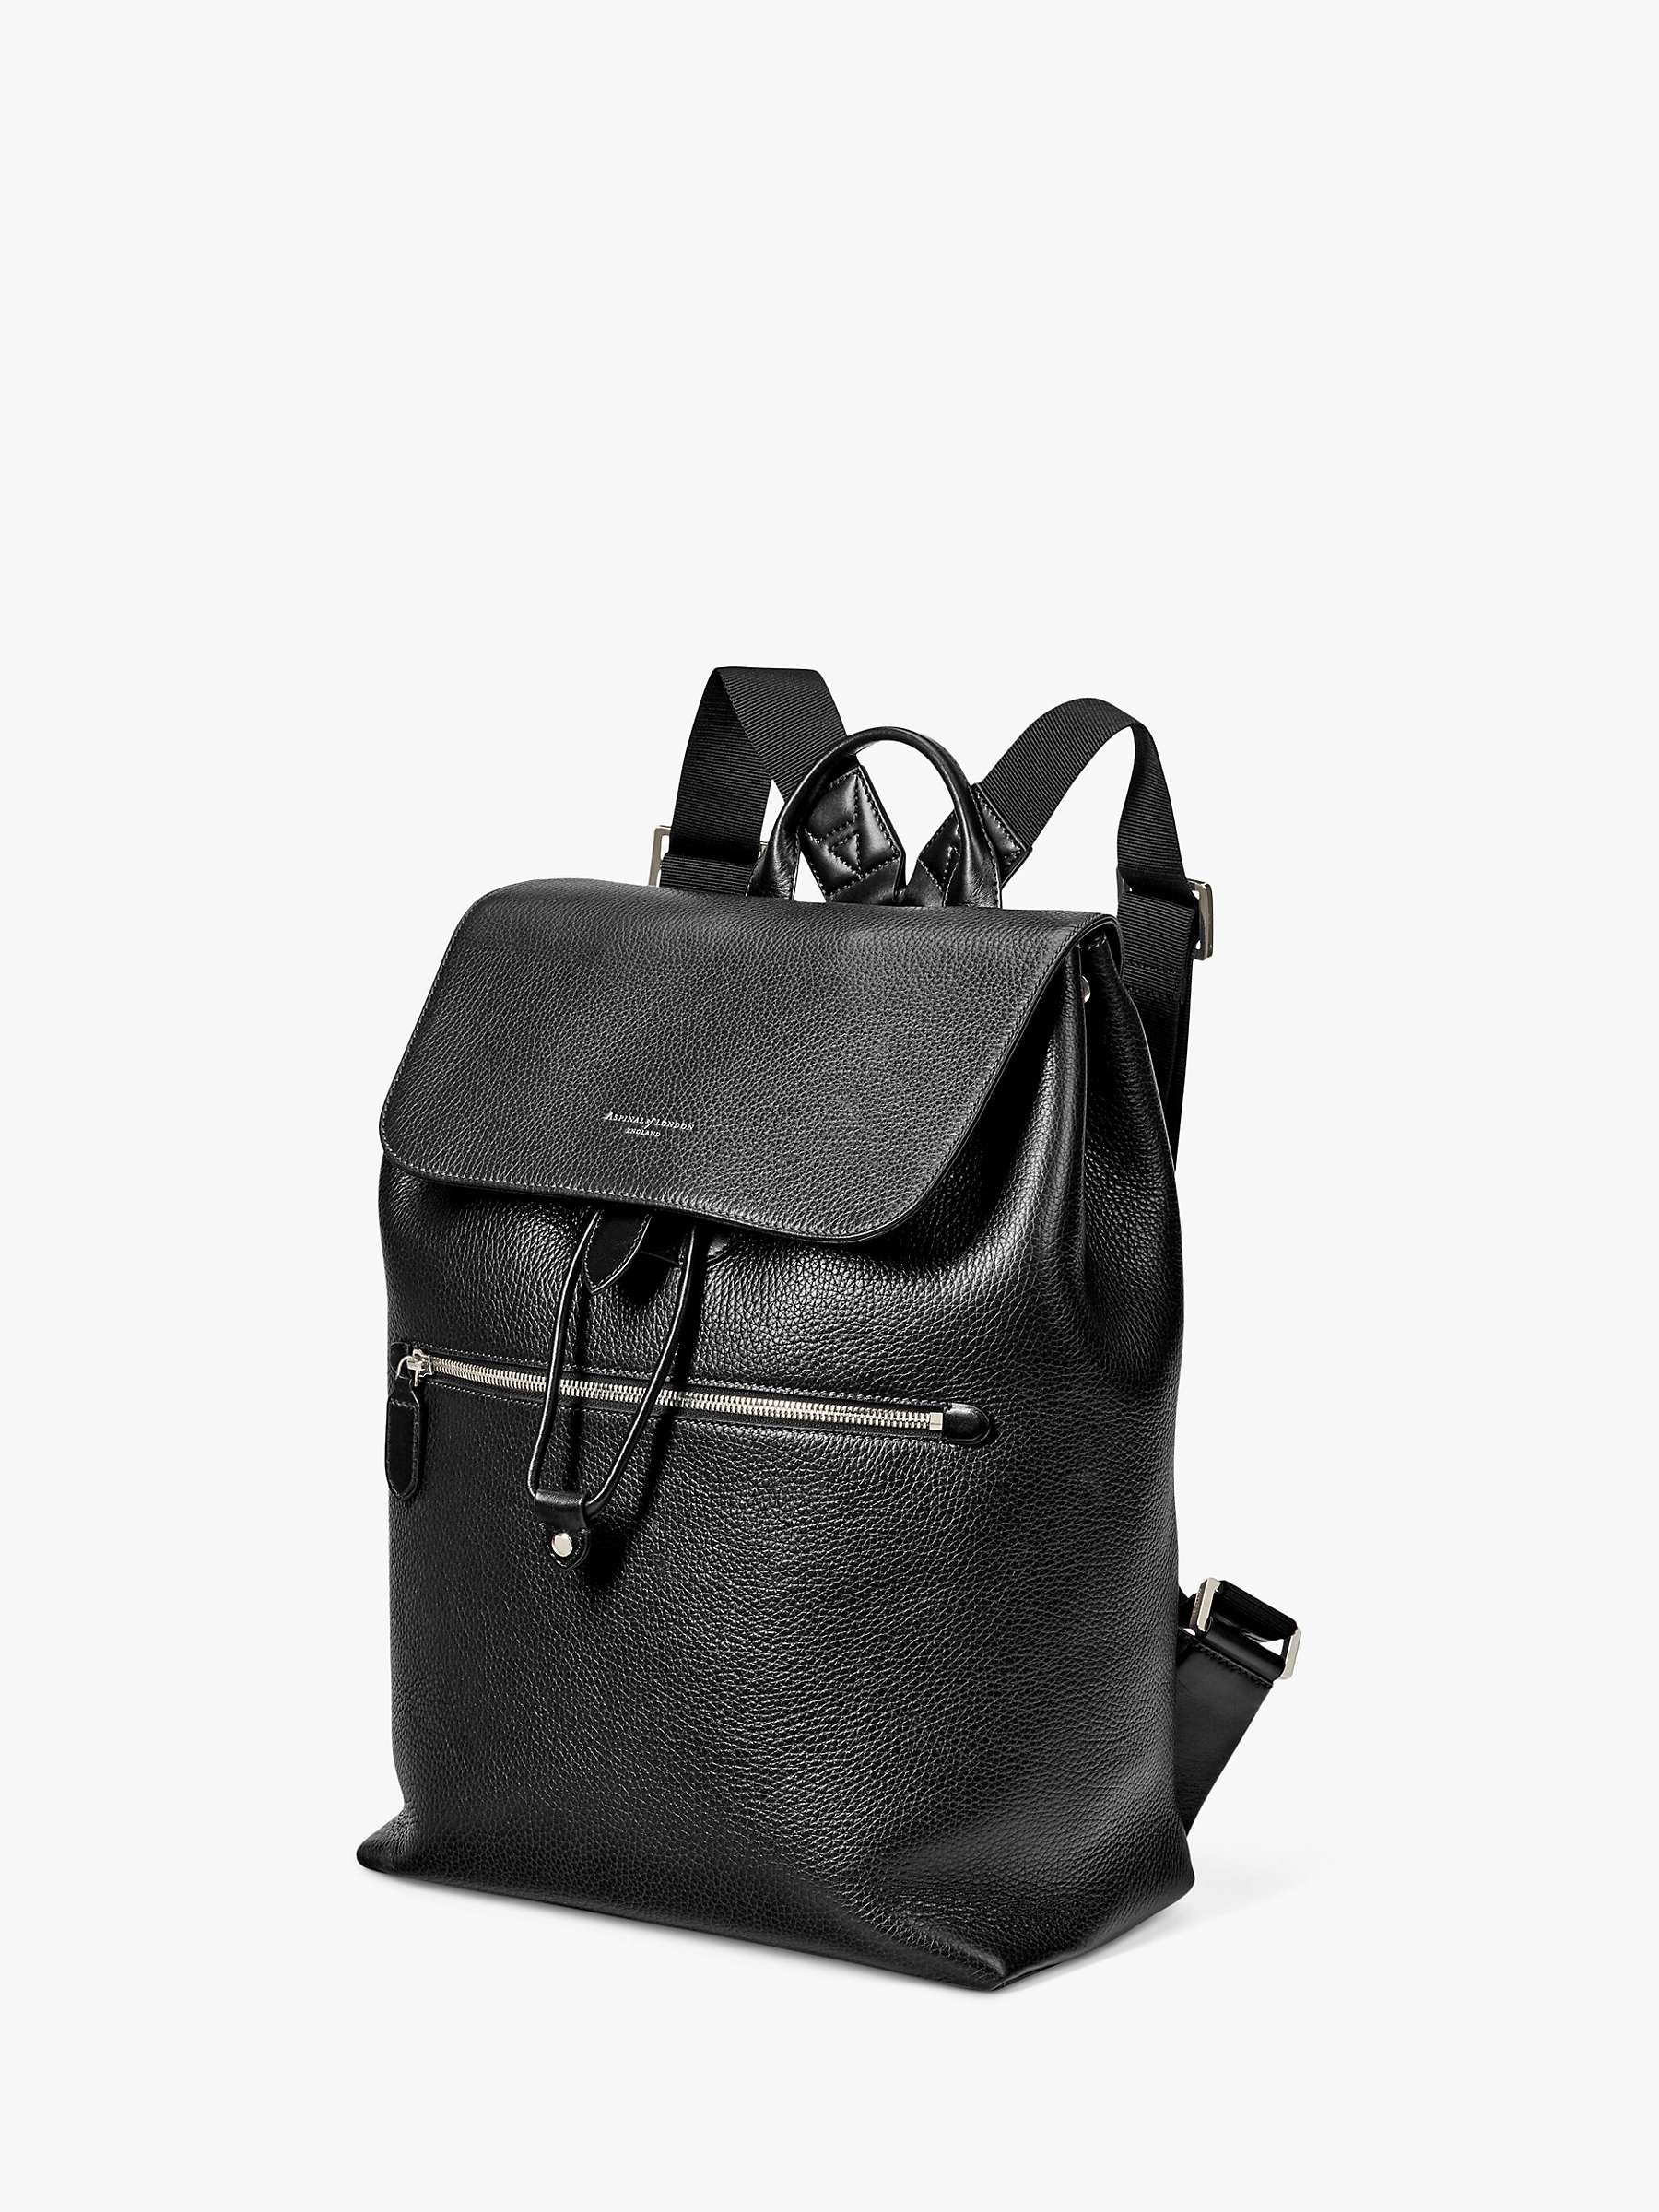 Buy Aspinal of London Reporter Leather Backpack Online at johnlewis.com